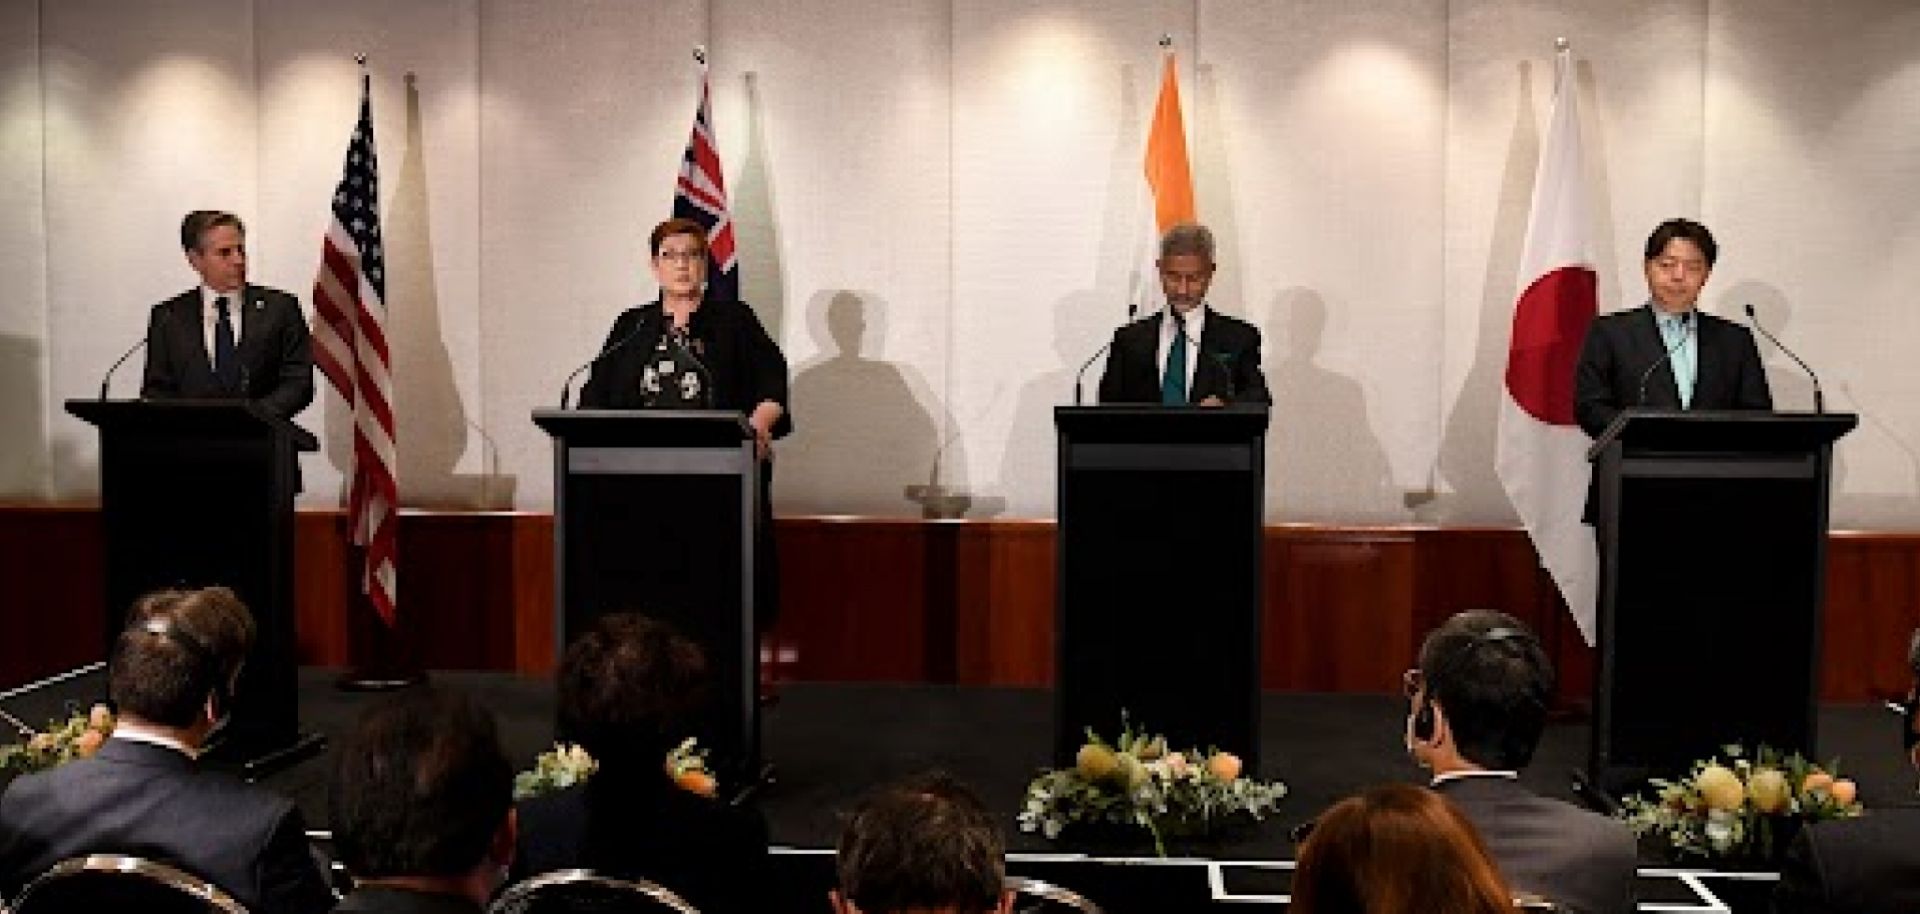 From left to right, the foreign ministers of the United States, Australia, India and Japan hold a press conference after a Quadrilateral Security Dialogue (Quad) meeting in Melbourne on Feb. 11, 2022.